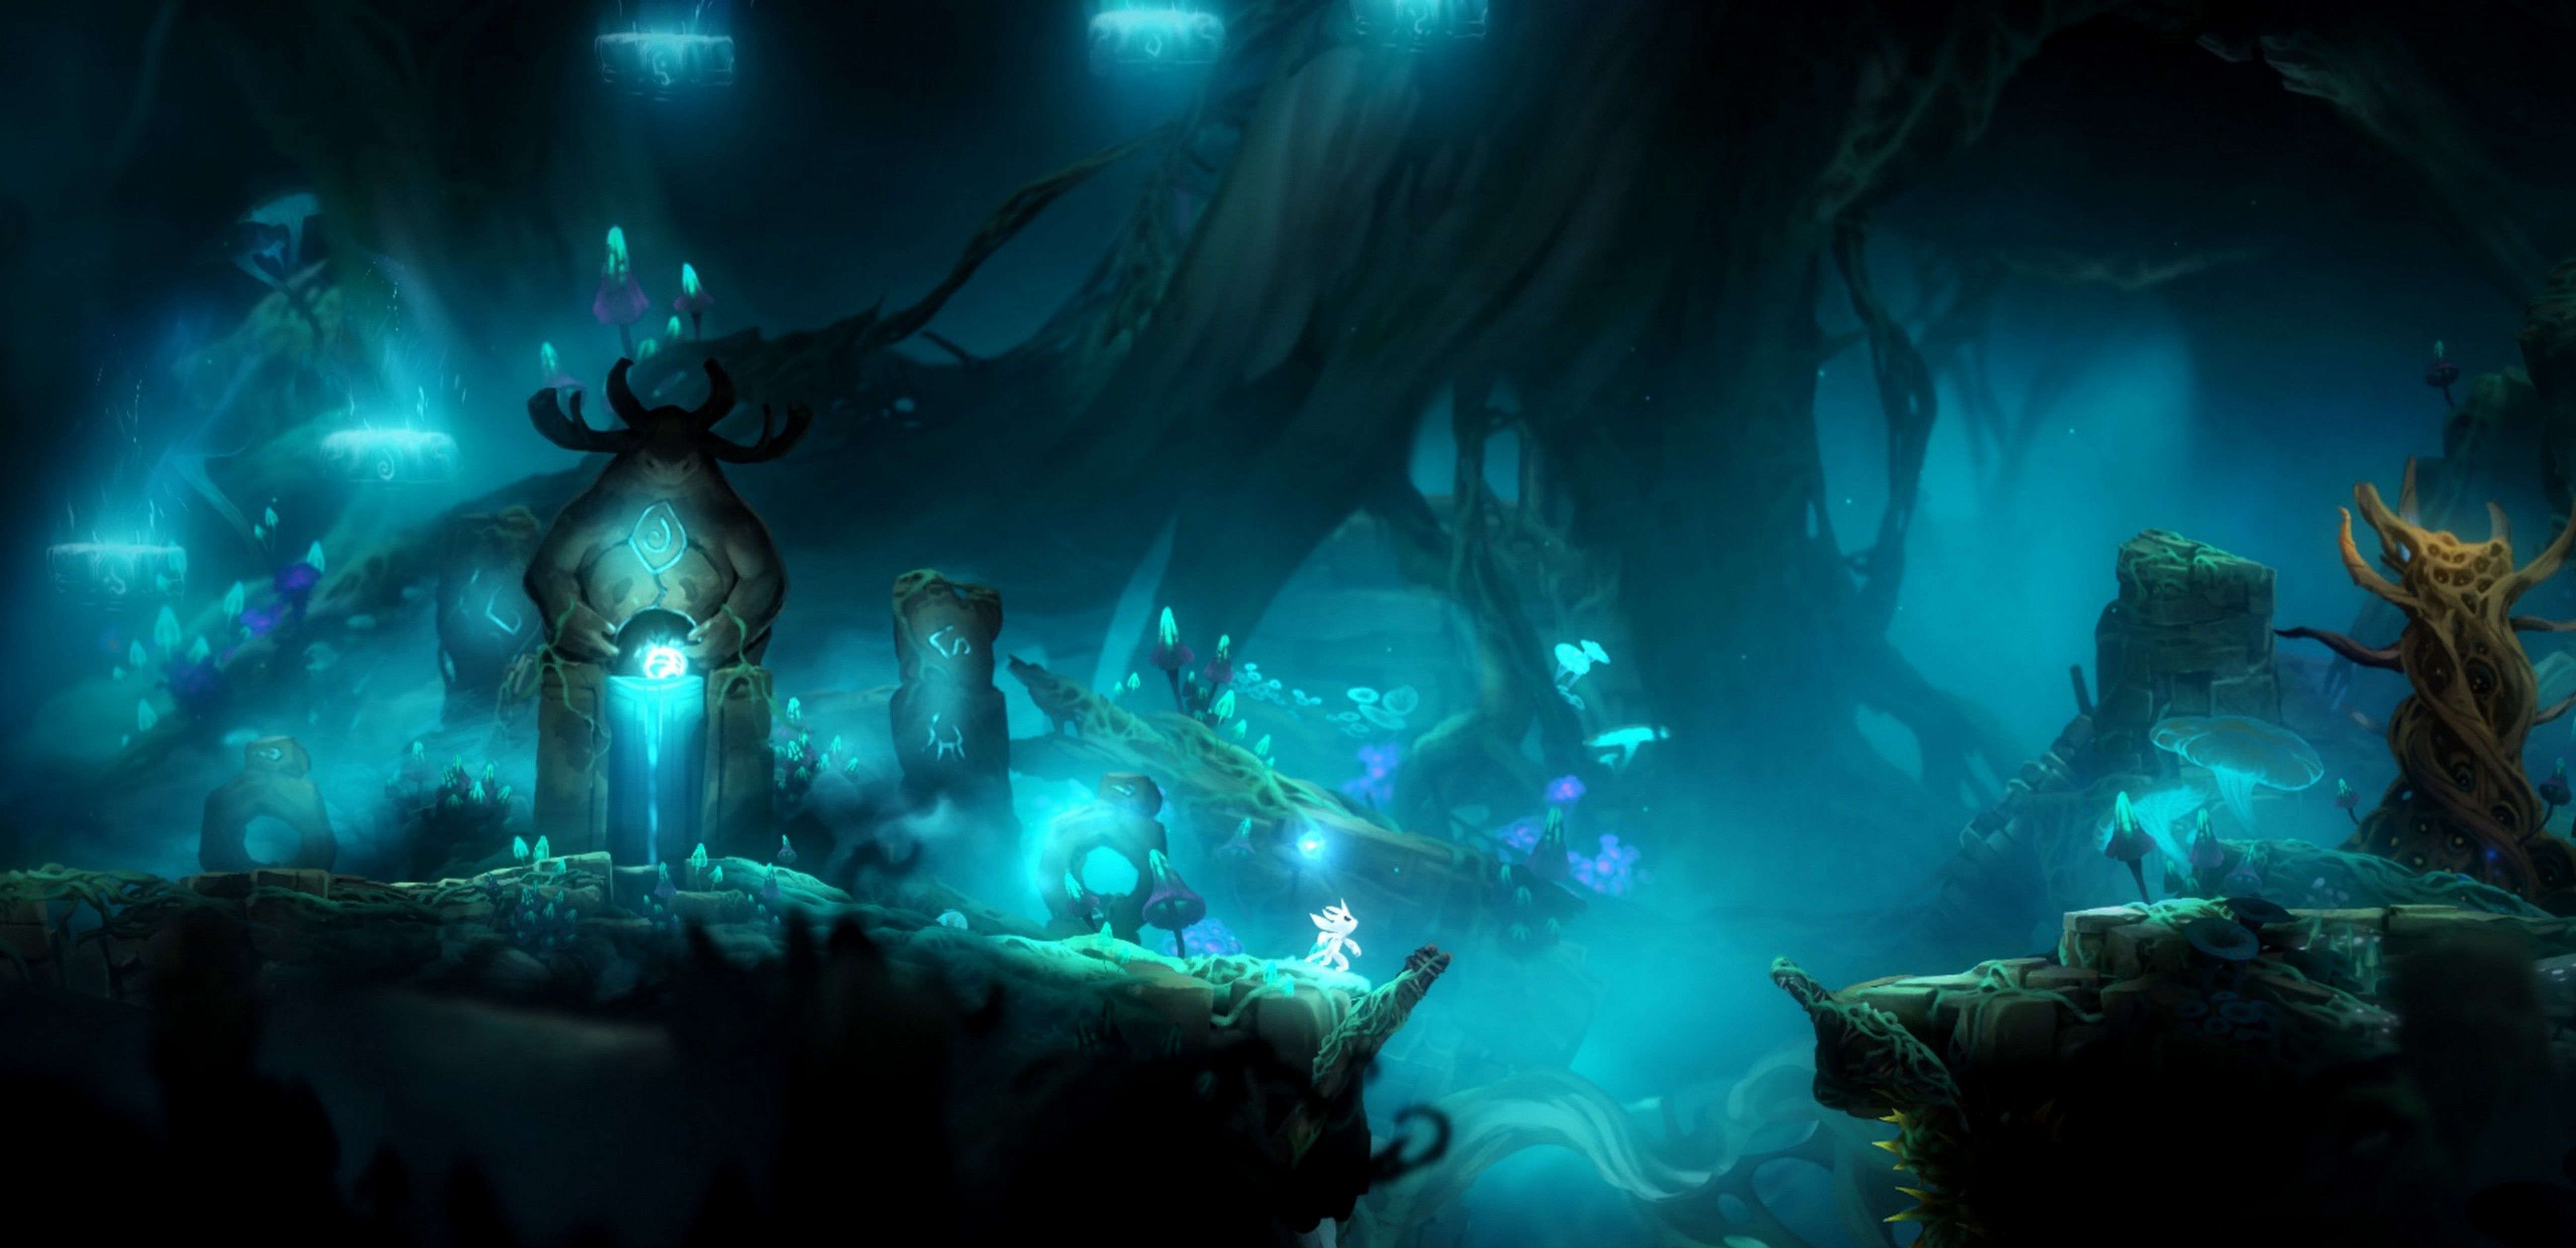 Ori and the Blind Forest: Definitive Edition Available Now for Windows 10